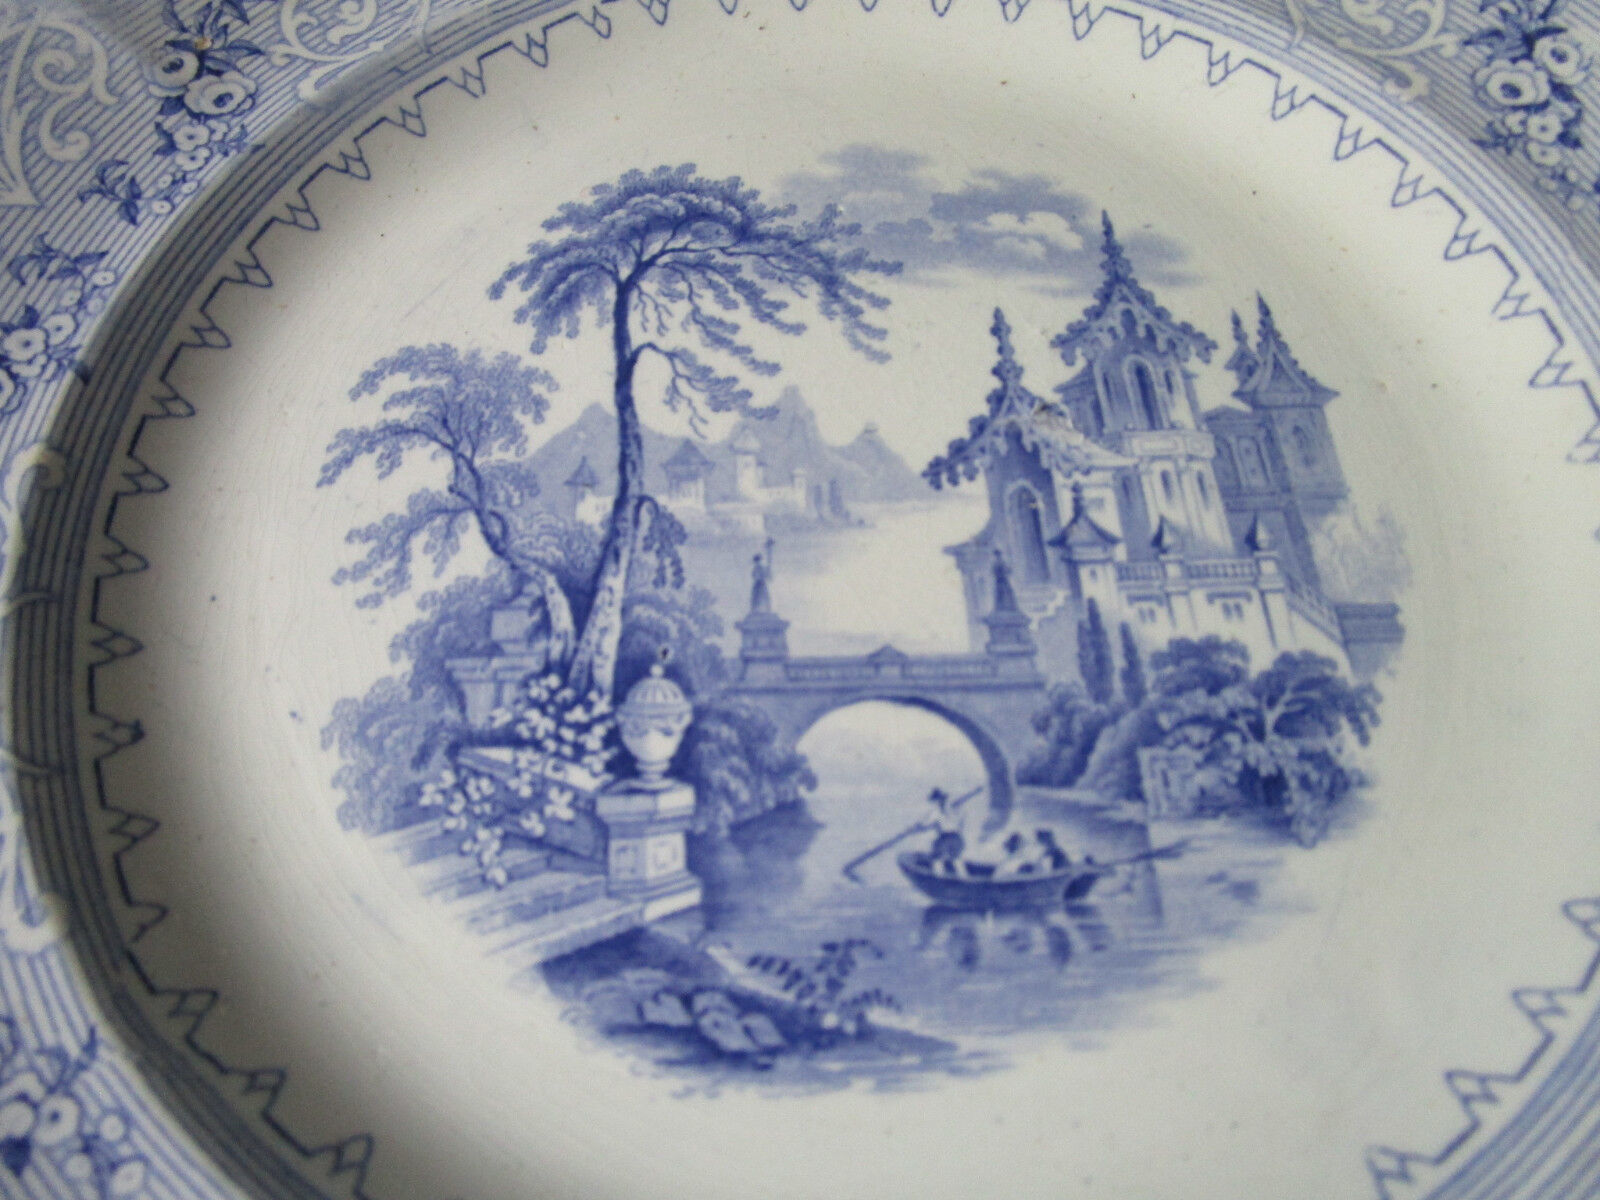 ANTIQUE 1850s WEDGWOOD GENEVA IRONSTONE BLUE TRANSFER COLLECTOR PLATE  - $123.75